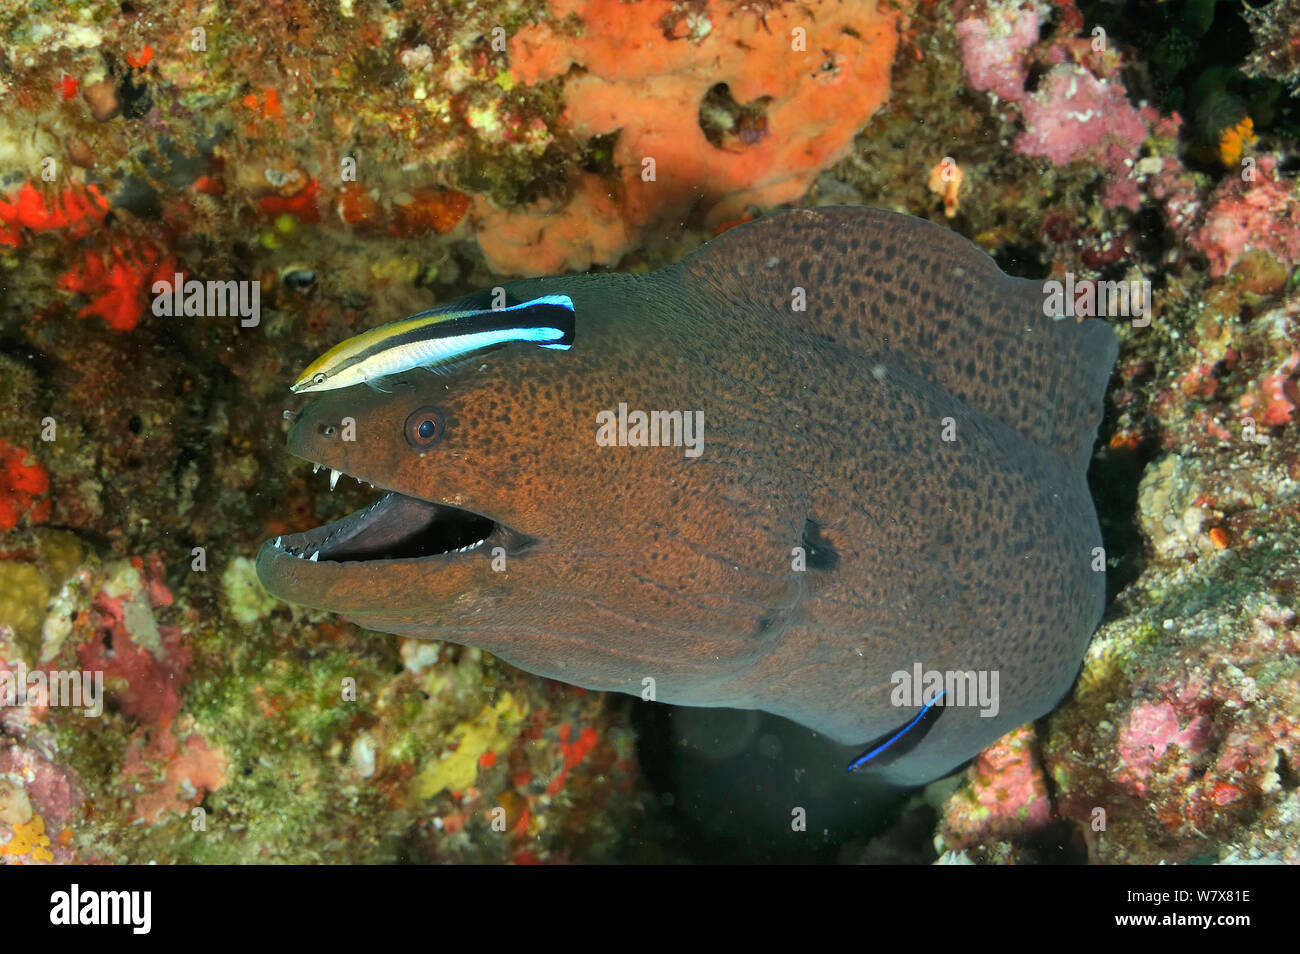 Two Bluestreak cleaner wrasses (Labroides dimidiatus) one a juvenile, cleaning a Giant moray (Gymnothorax javanicus) Maldives. Indian Ocean. Stock Photo